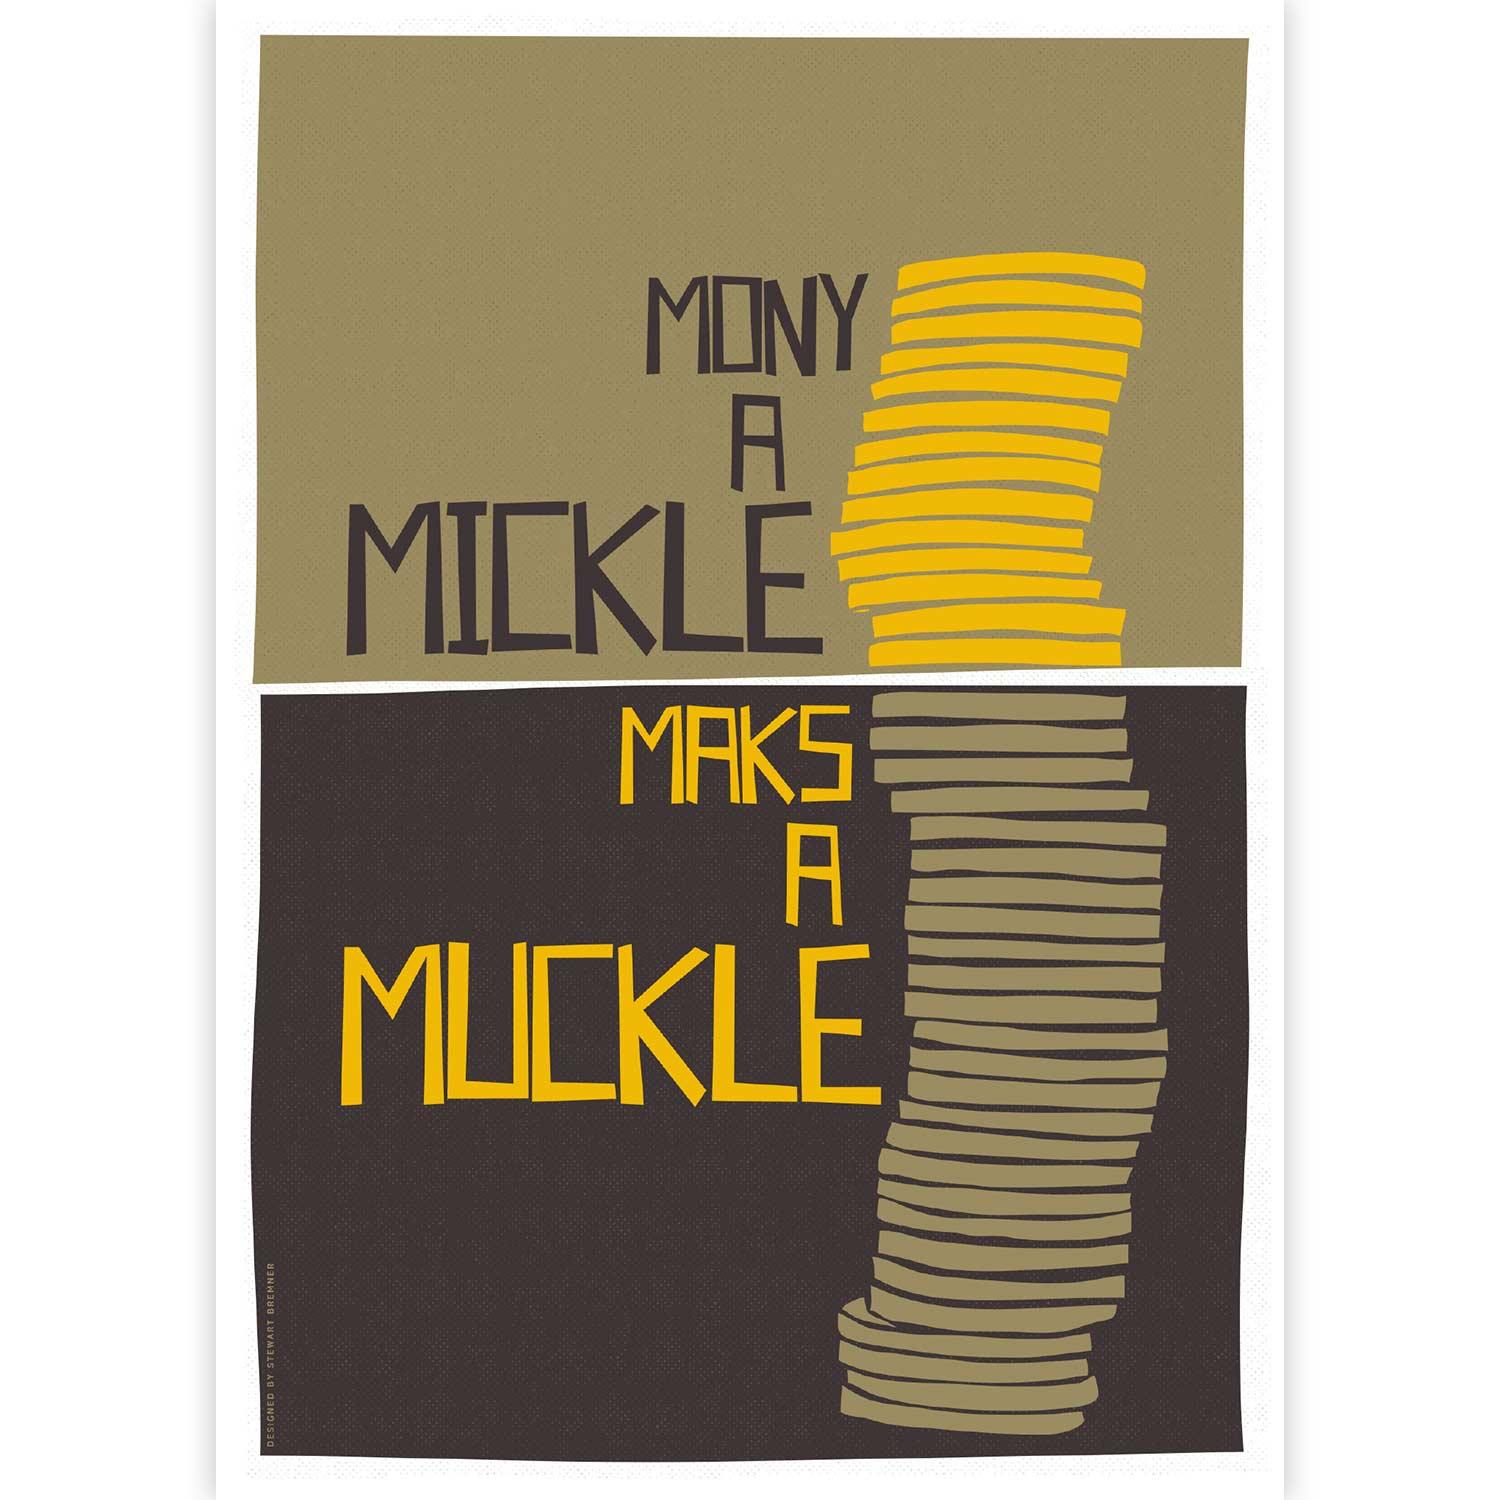 Mony a Mickle Maks a Muckle by Stewart Bremner